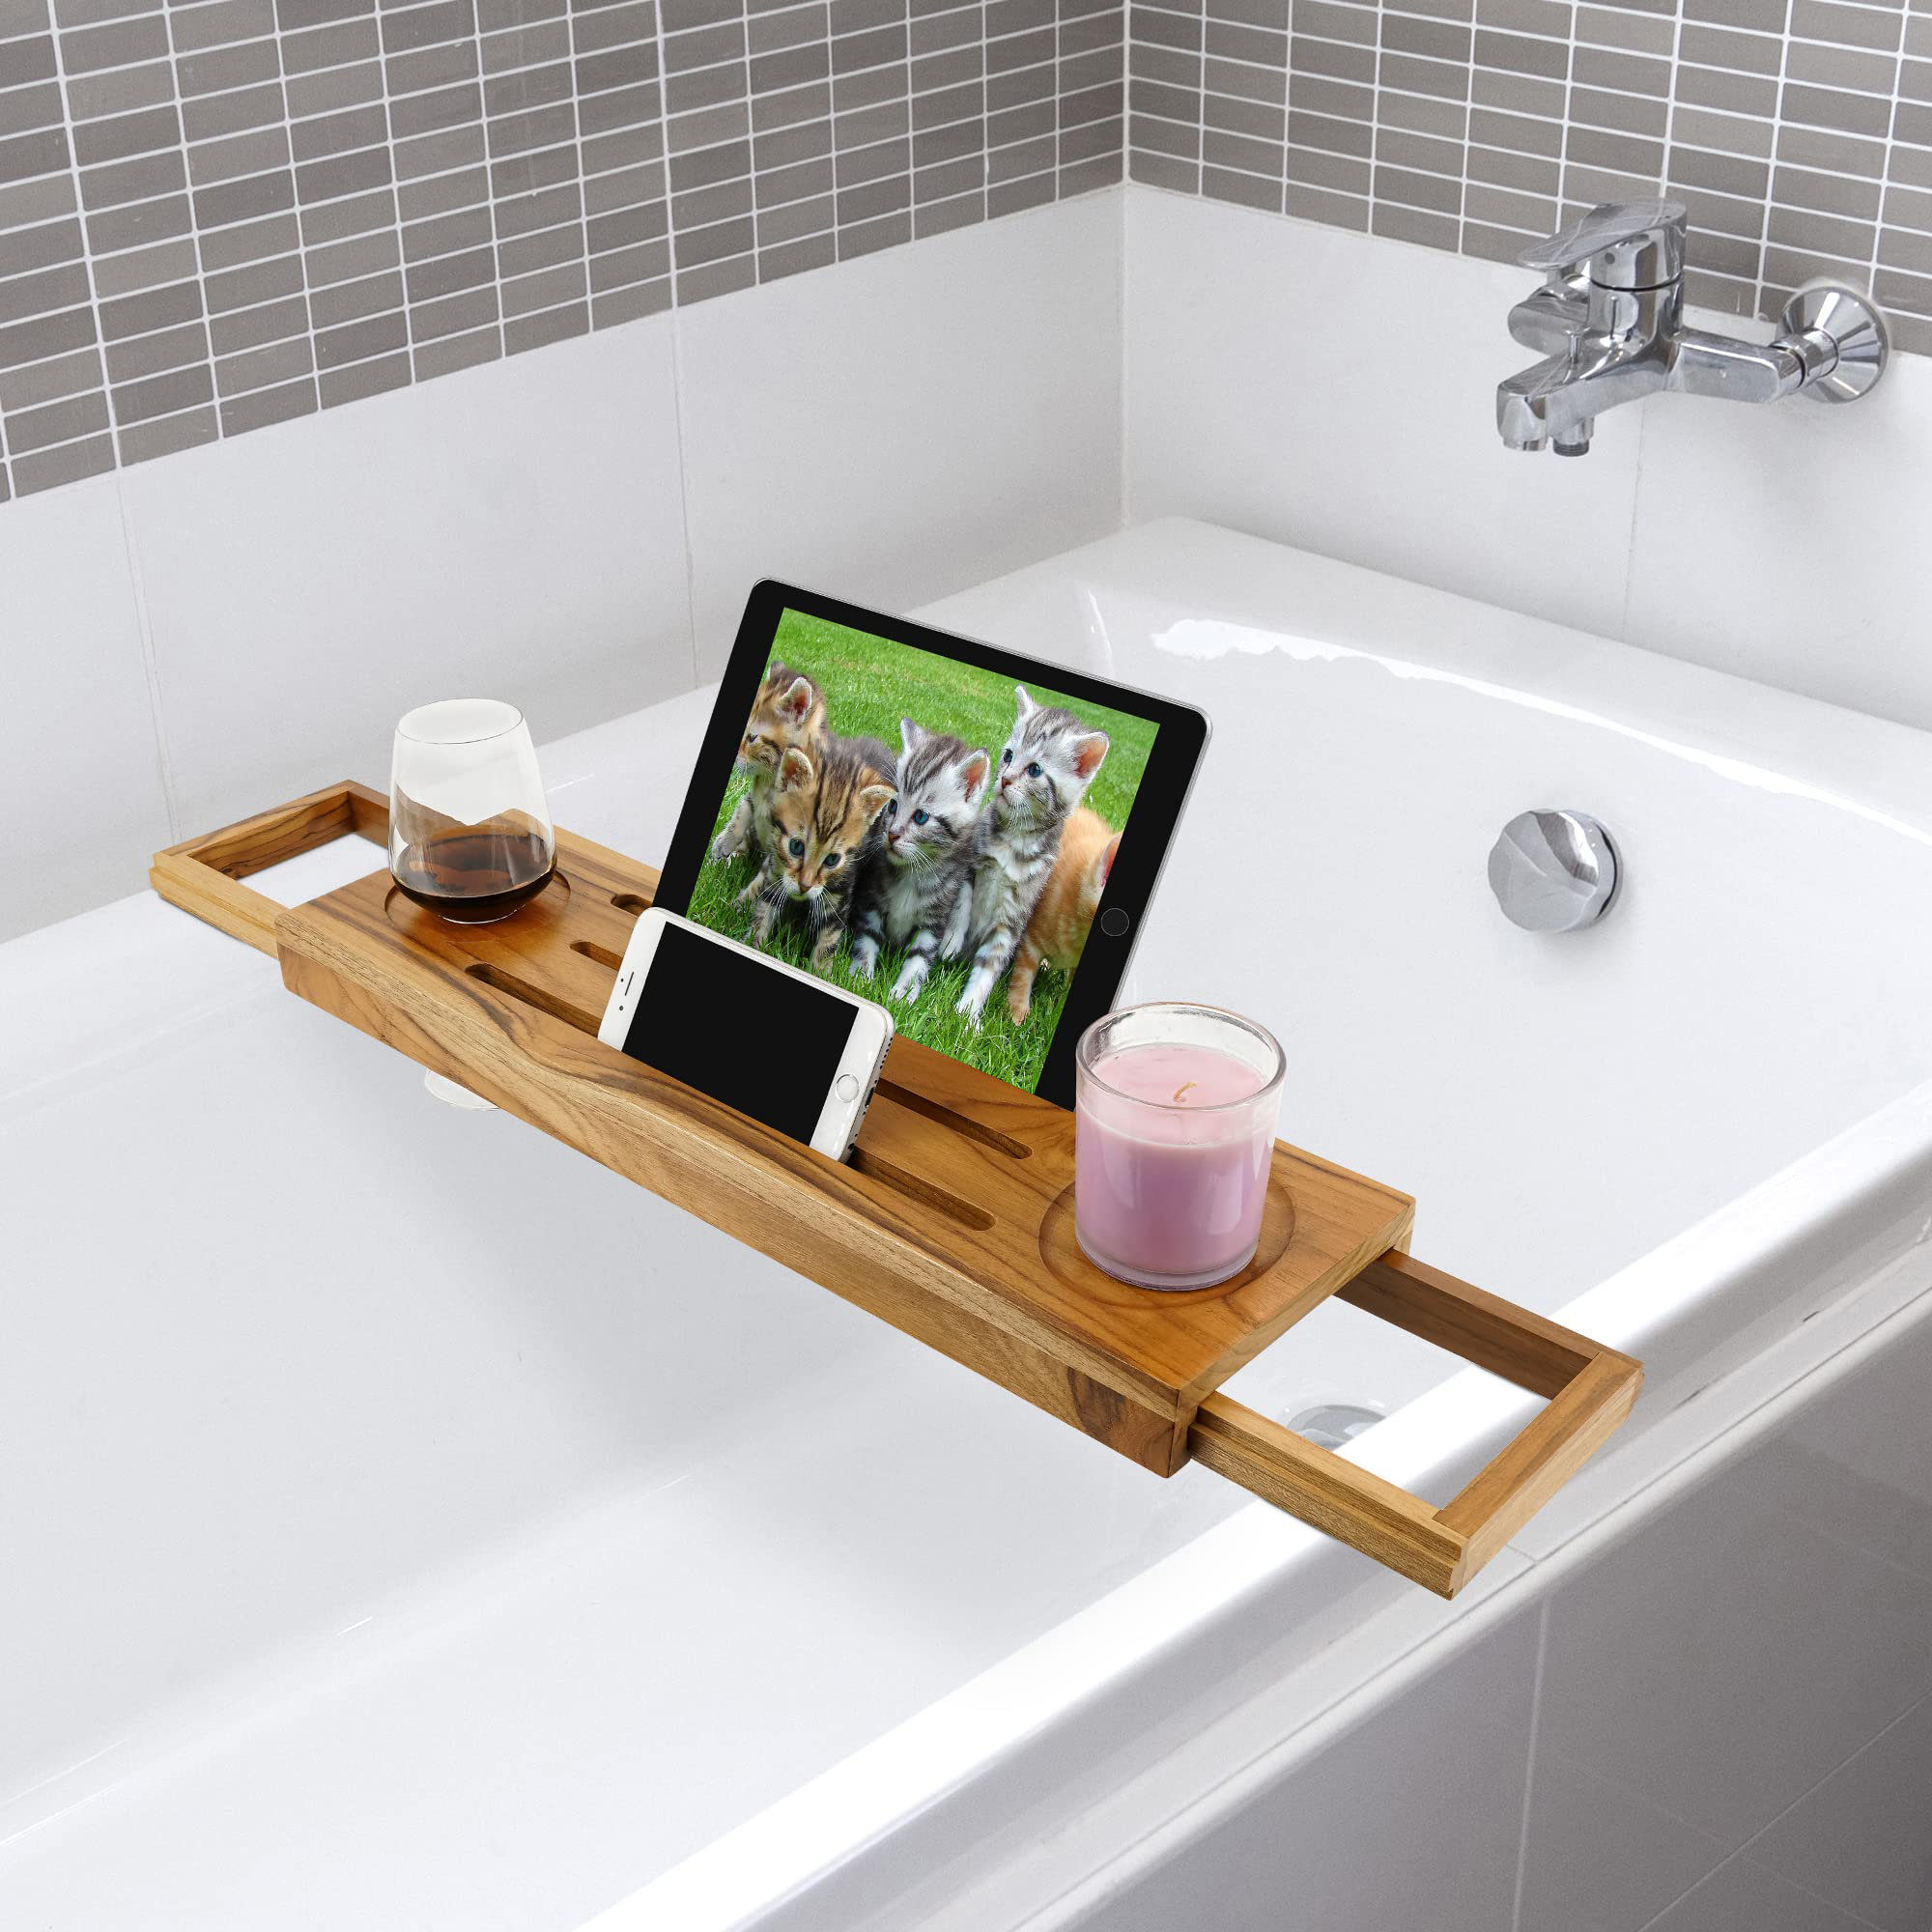 Gardner Bamboo Bathtub Tray - Wood Bath Caddy with Extended Sides for Bath  Accessories